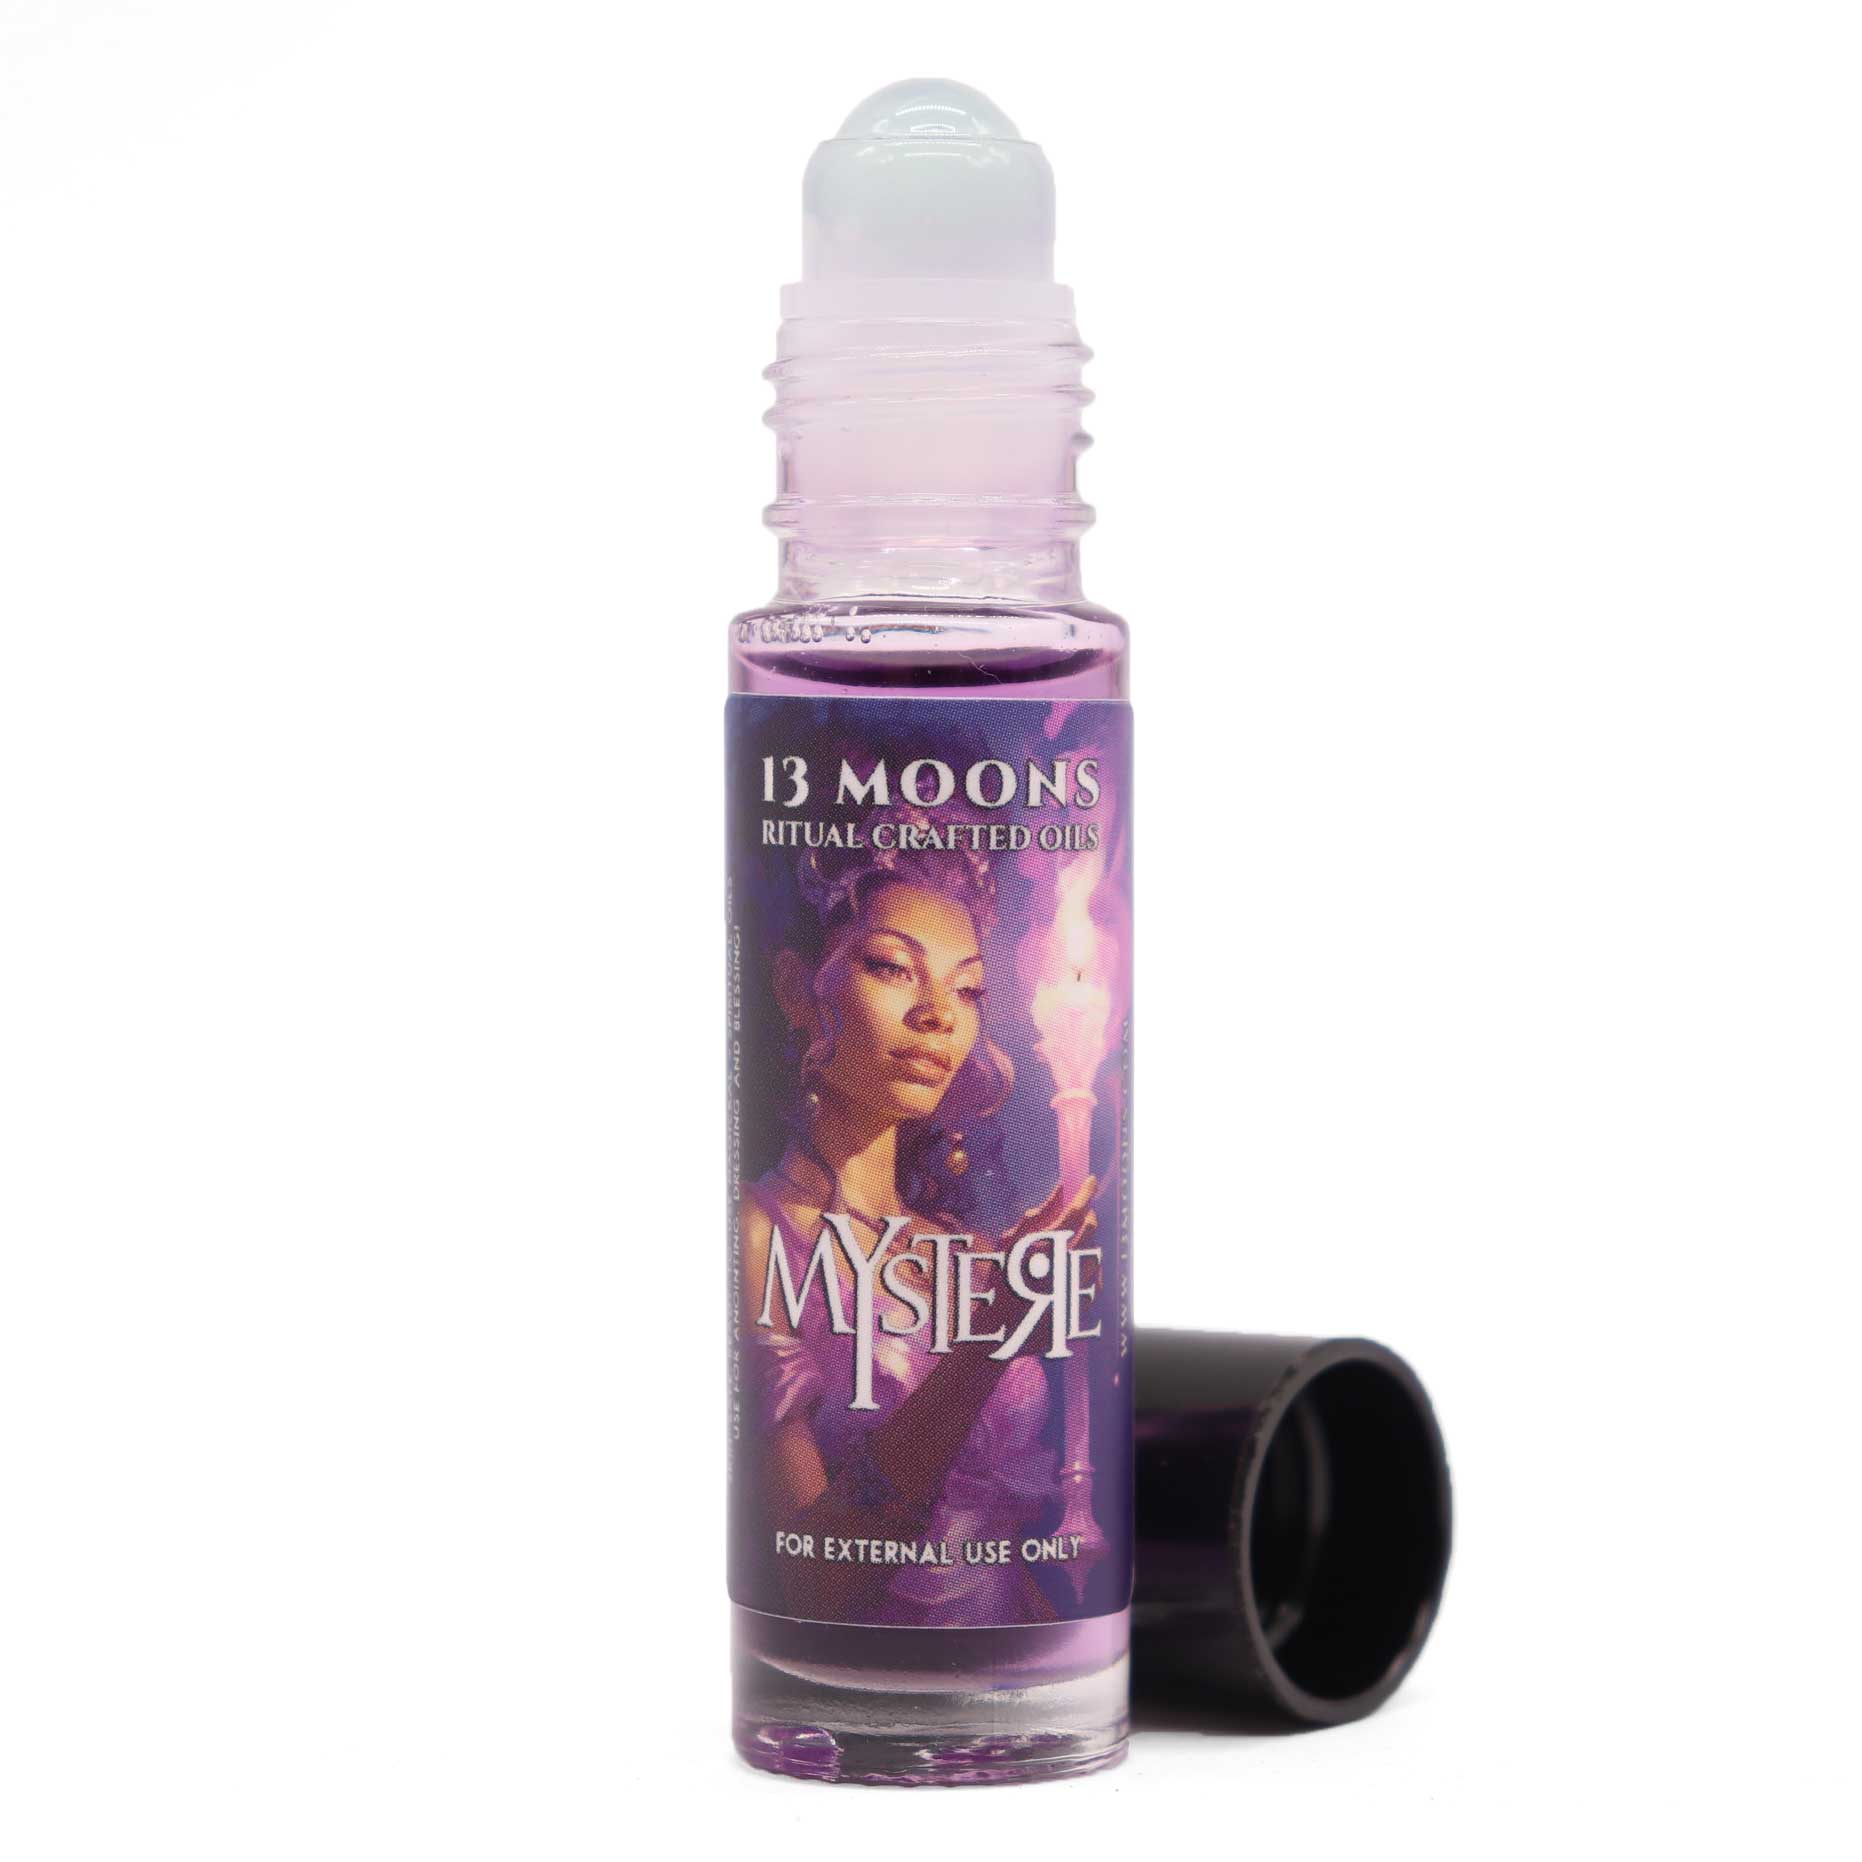 Mystere Ritual Crafted Oil by 13 Moons - 13 Moons